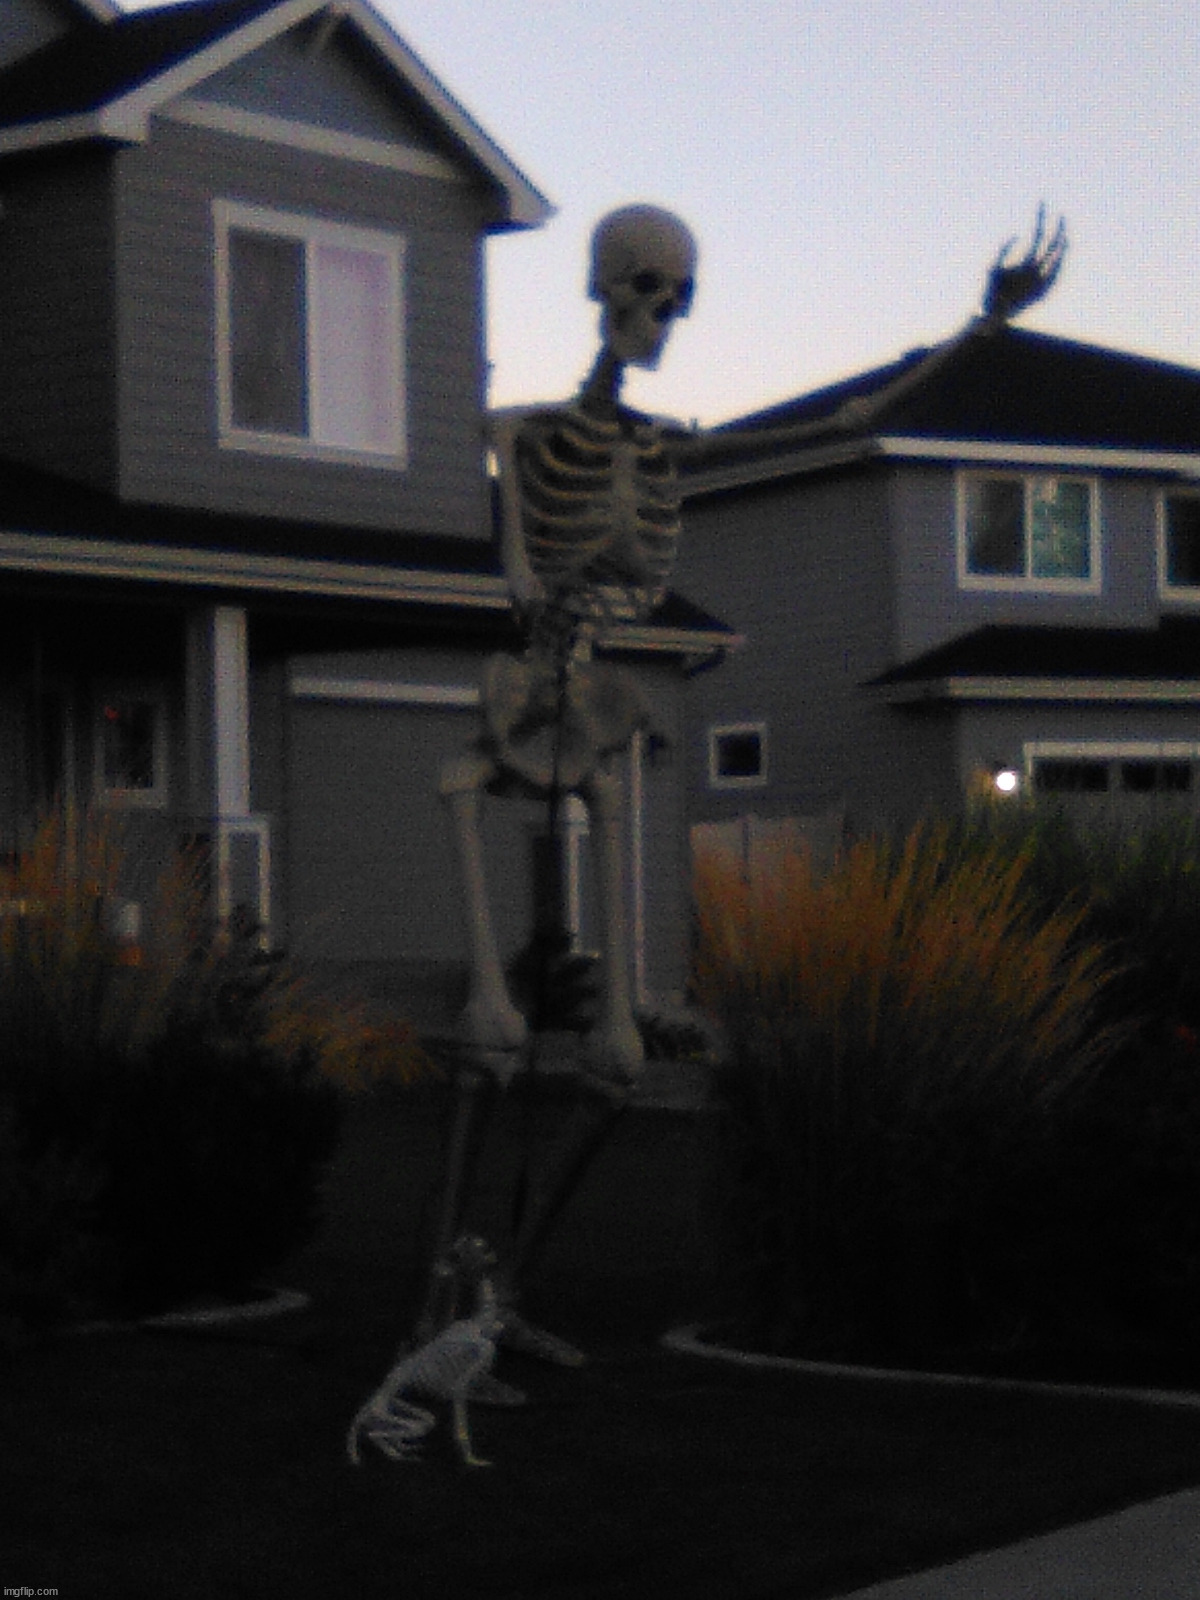 Skeleton walking the dog | image tagged in picture,spooky,skeleton | made w/ Imgflip meme maker